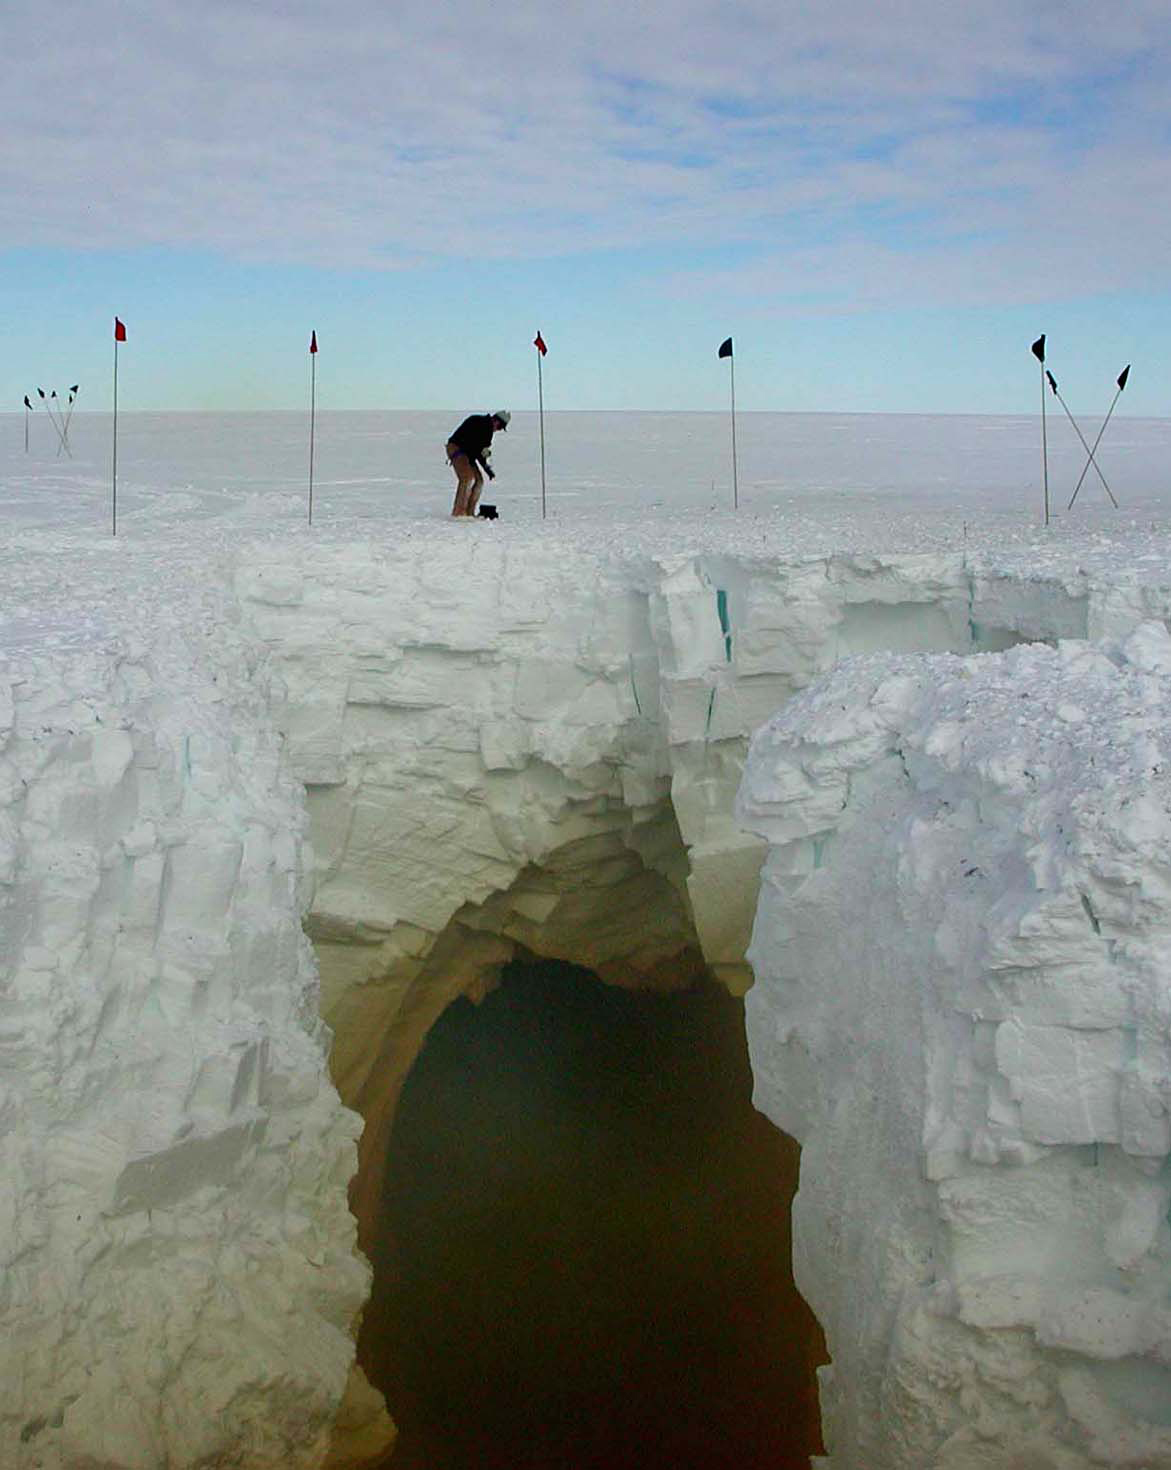 A distant view of a person standing on a snow bridge over a large crevasse in the snow.